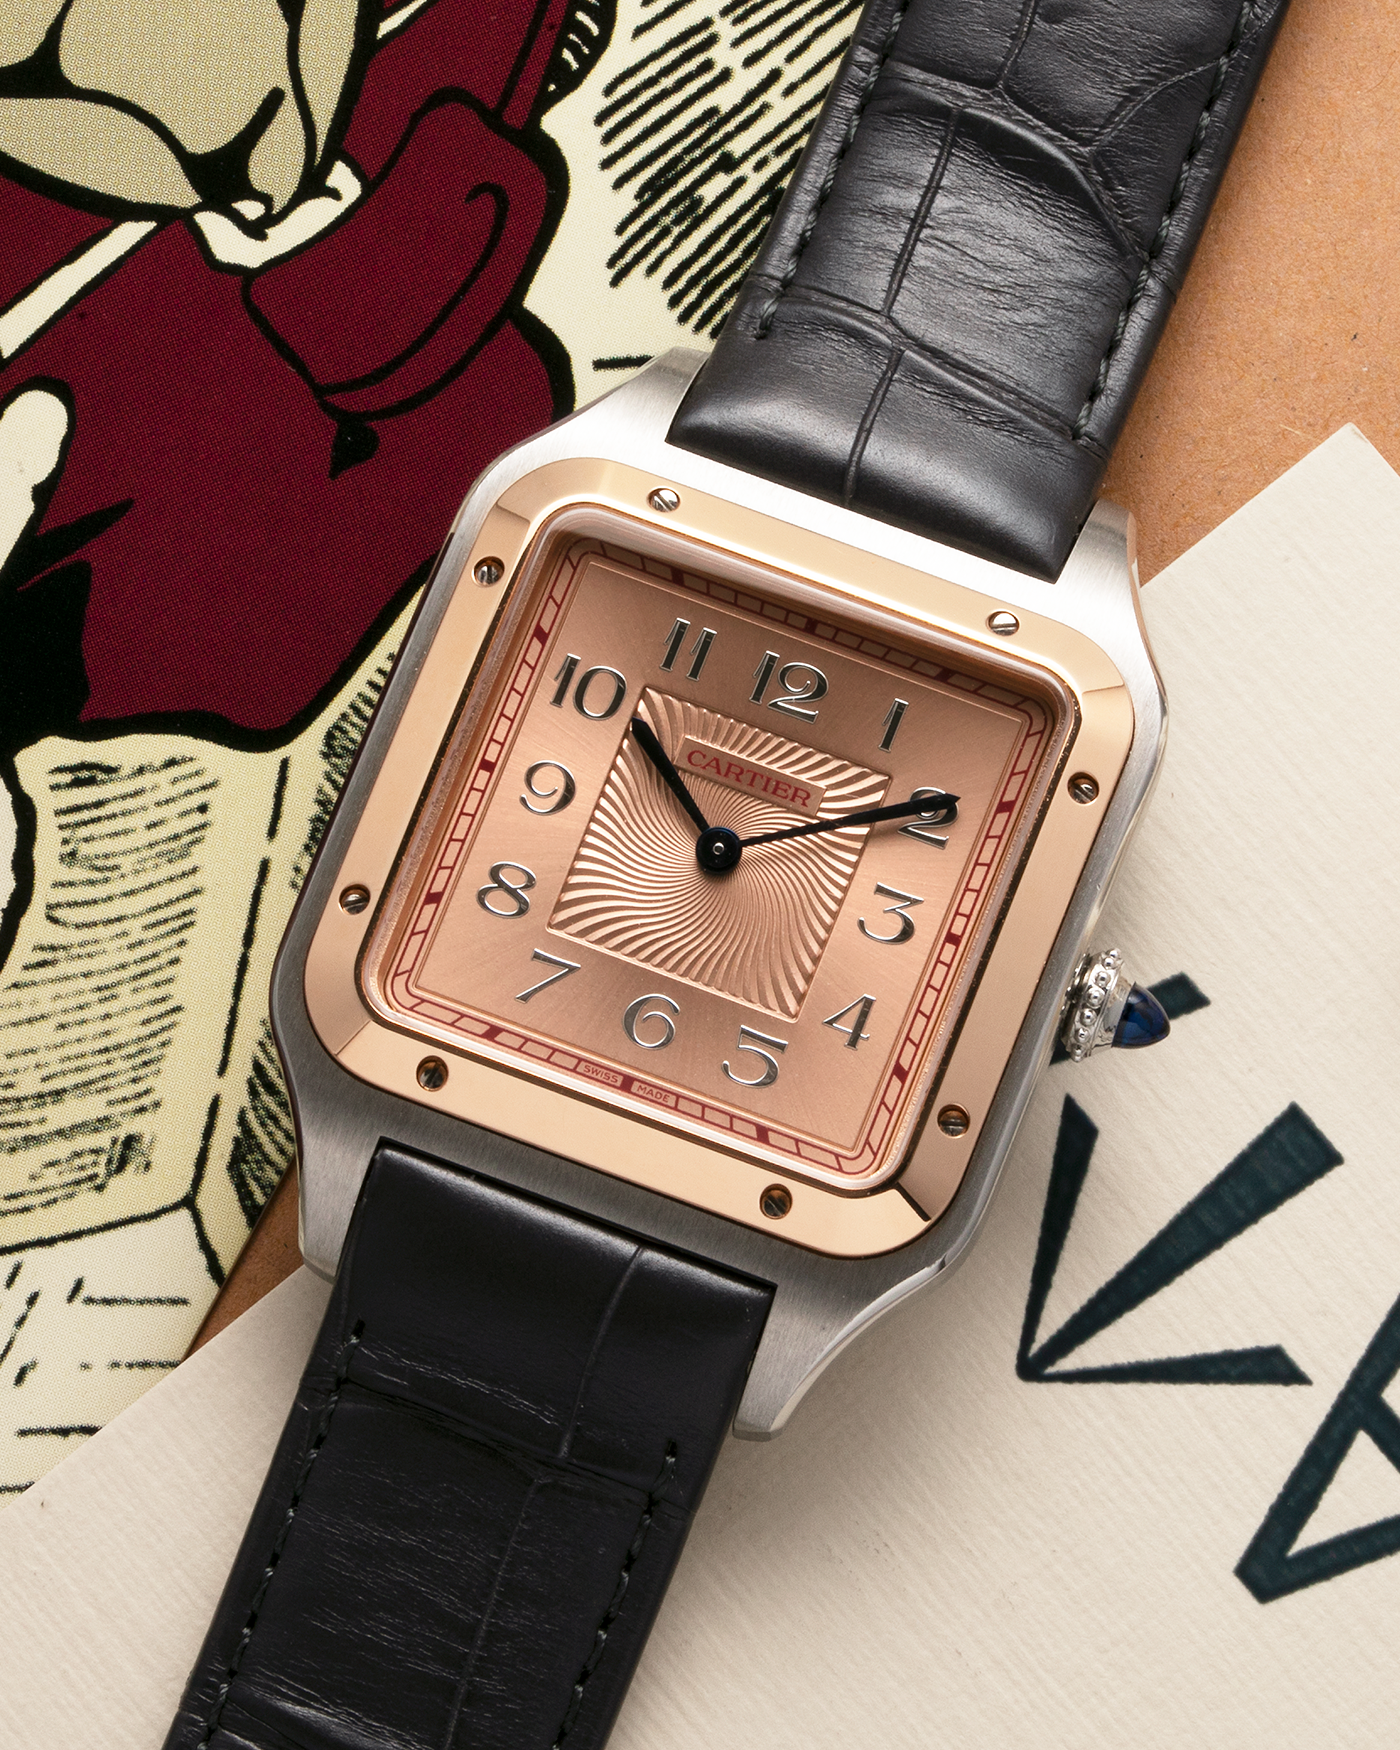 Brand: Cartier Year: 2021 Model: Santos-Dumont XL Reference Number: CRW2SA0025 Material: Stainless Steel Case and 18-carat Rose Gold Bezel Movement: Cartier Cal. 430 MC, Manual-Winding Case Diameter: 46.6mm x 33.9mm x 7.5mm Bracelet / Strap: Cartier Anthracite Grey Alligator Leather Strap with Signed Stainless Steel Tang Buckle